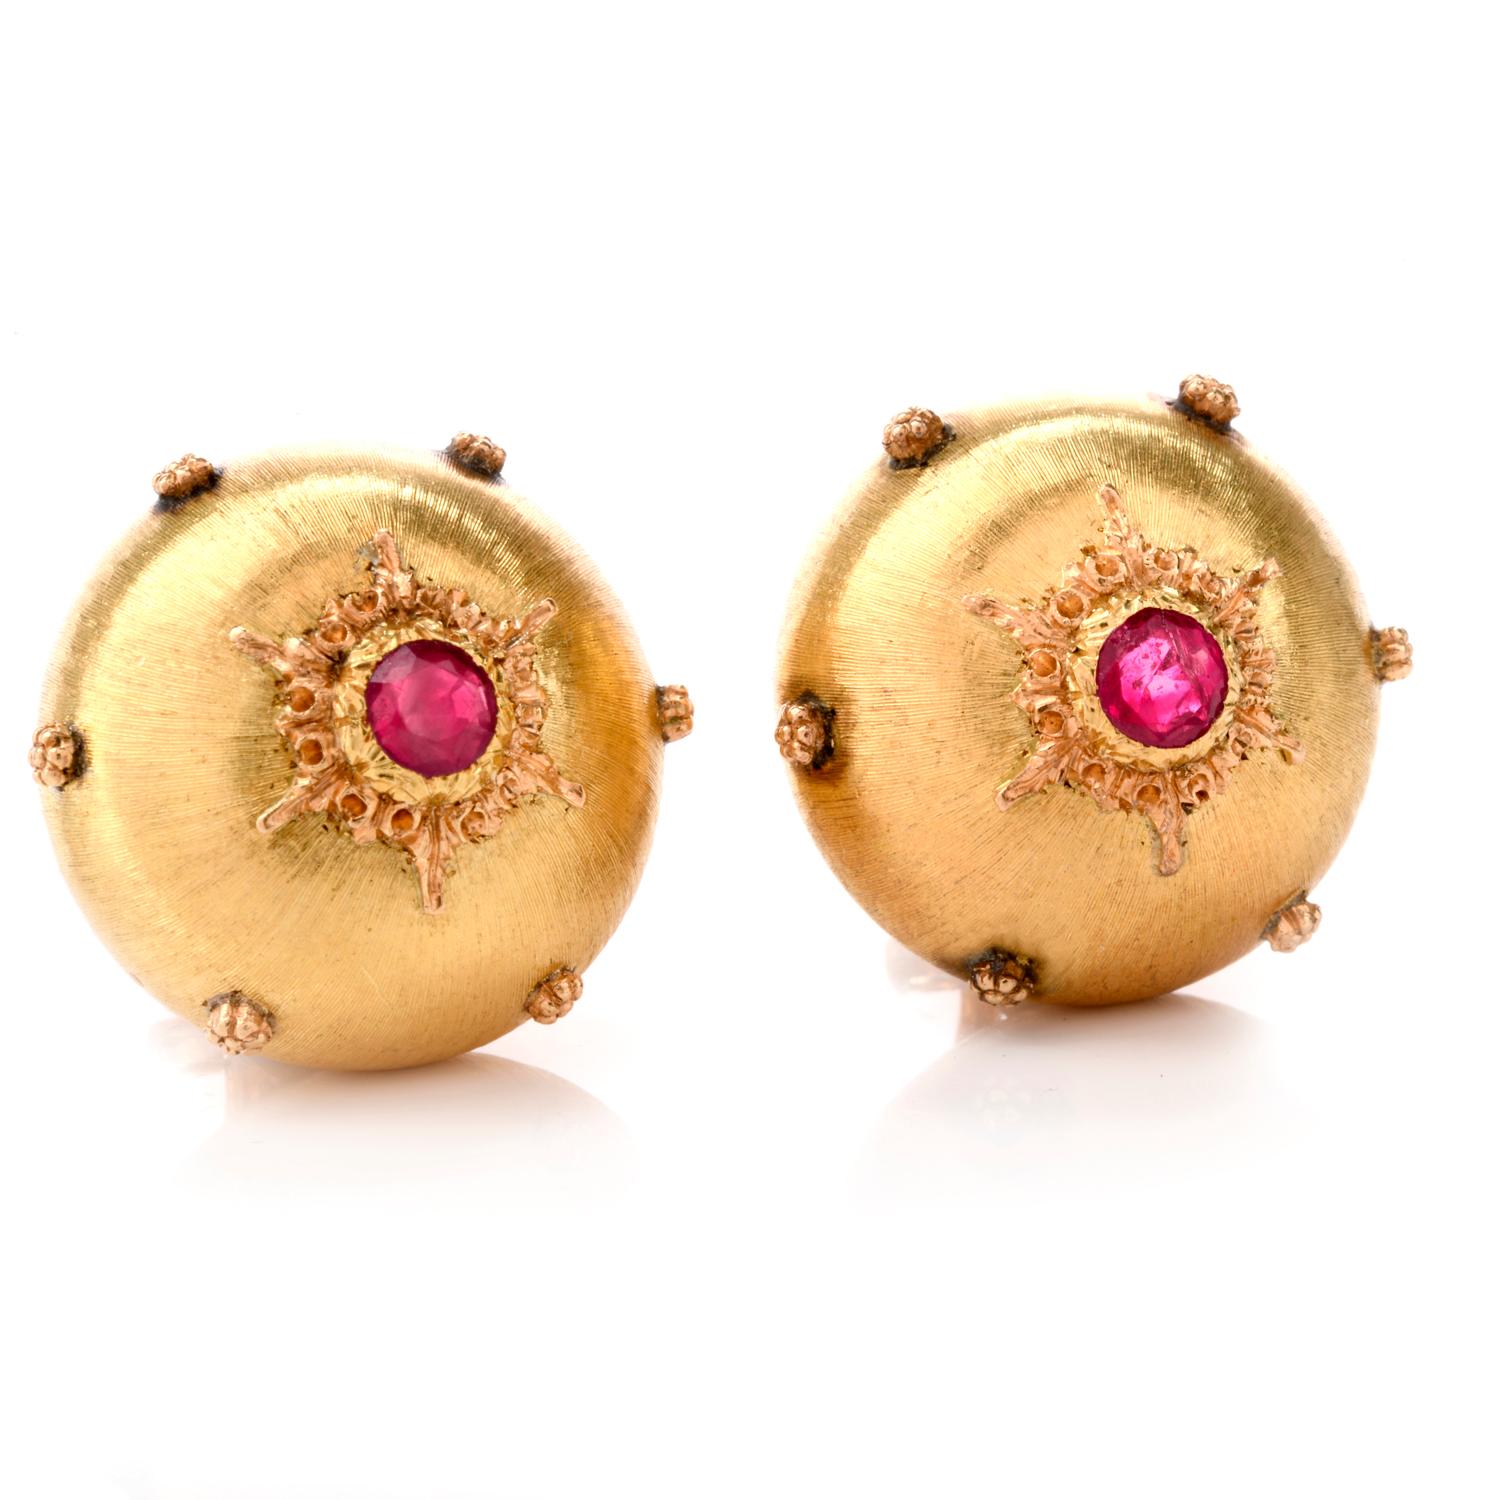 Stunning and Elegant! These 'Rigato' Buccellati Ruby button shape earrings were crafted in Luxurious 18K Gold. Measuring approx. 19.37 x 19.37 x 11.09mm High, these will be the highlight of any evening.

Prominently centered are 1 brilliant cut Ruby